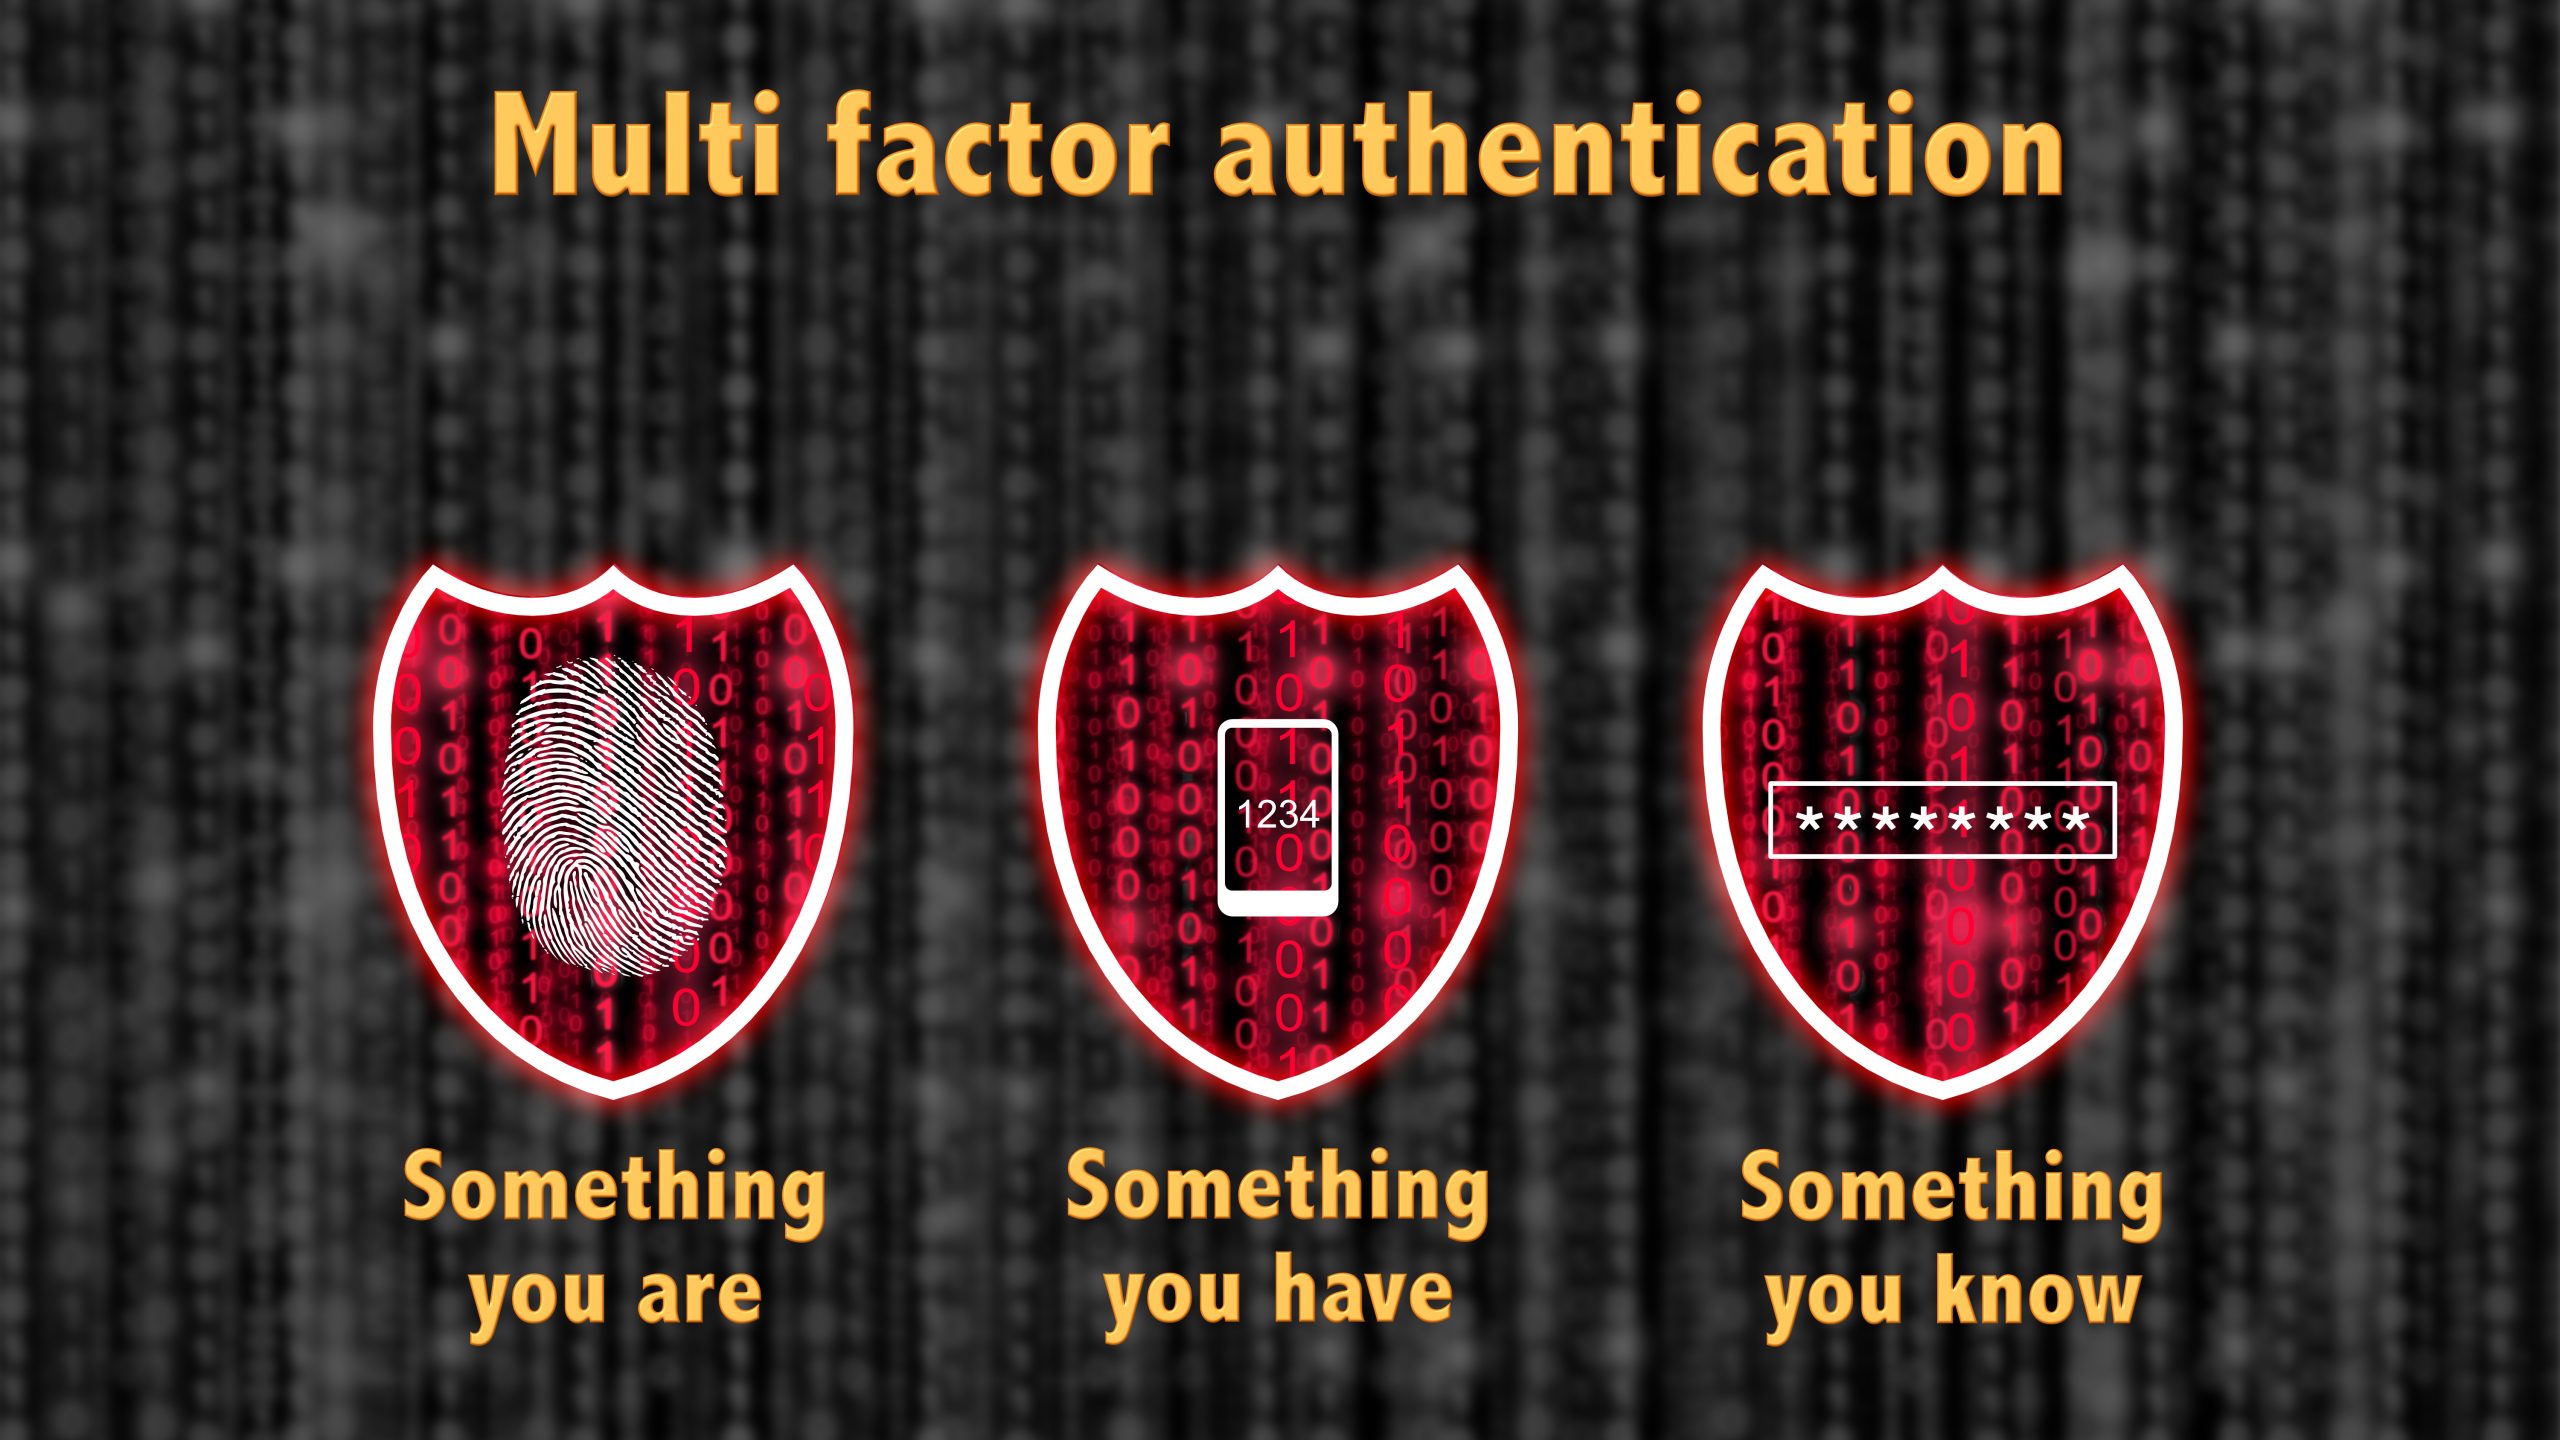 Enhance your security with Advanced MFA